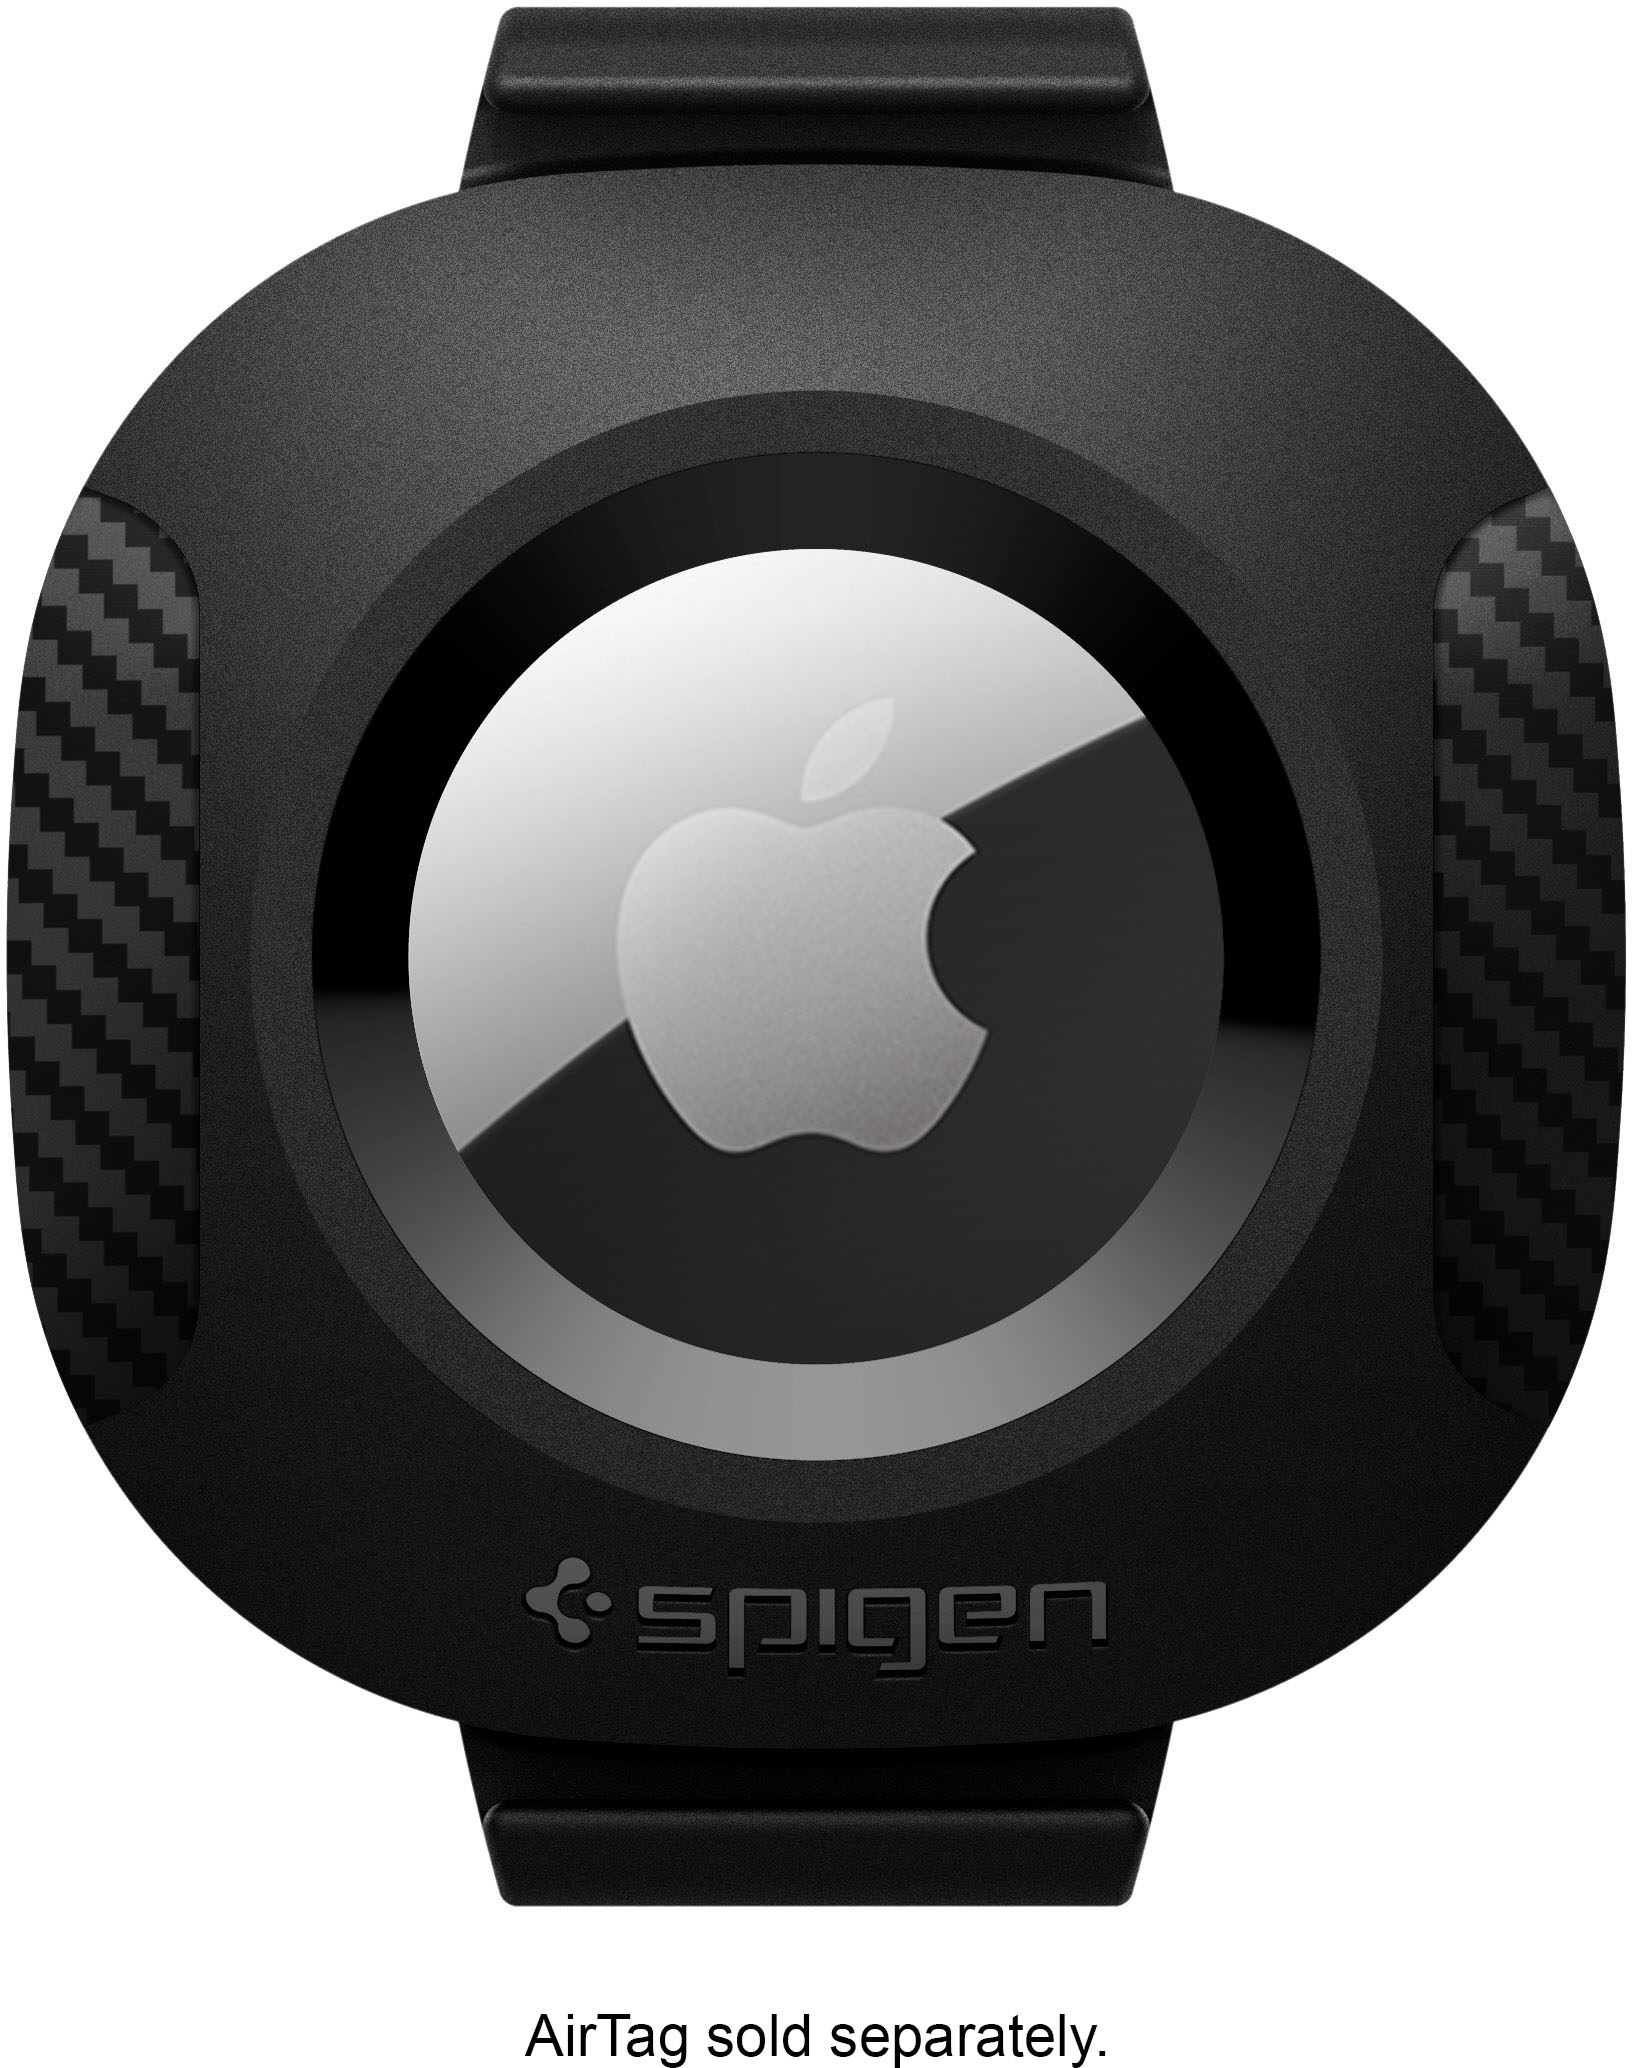 ARMODD iTag black (AirTag alternative) with Apple Find My support 